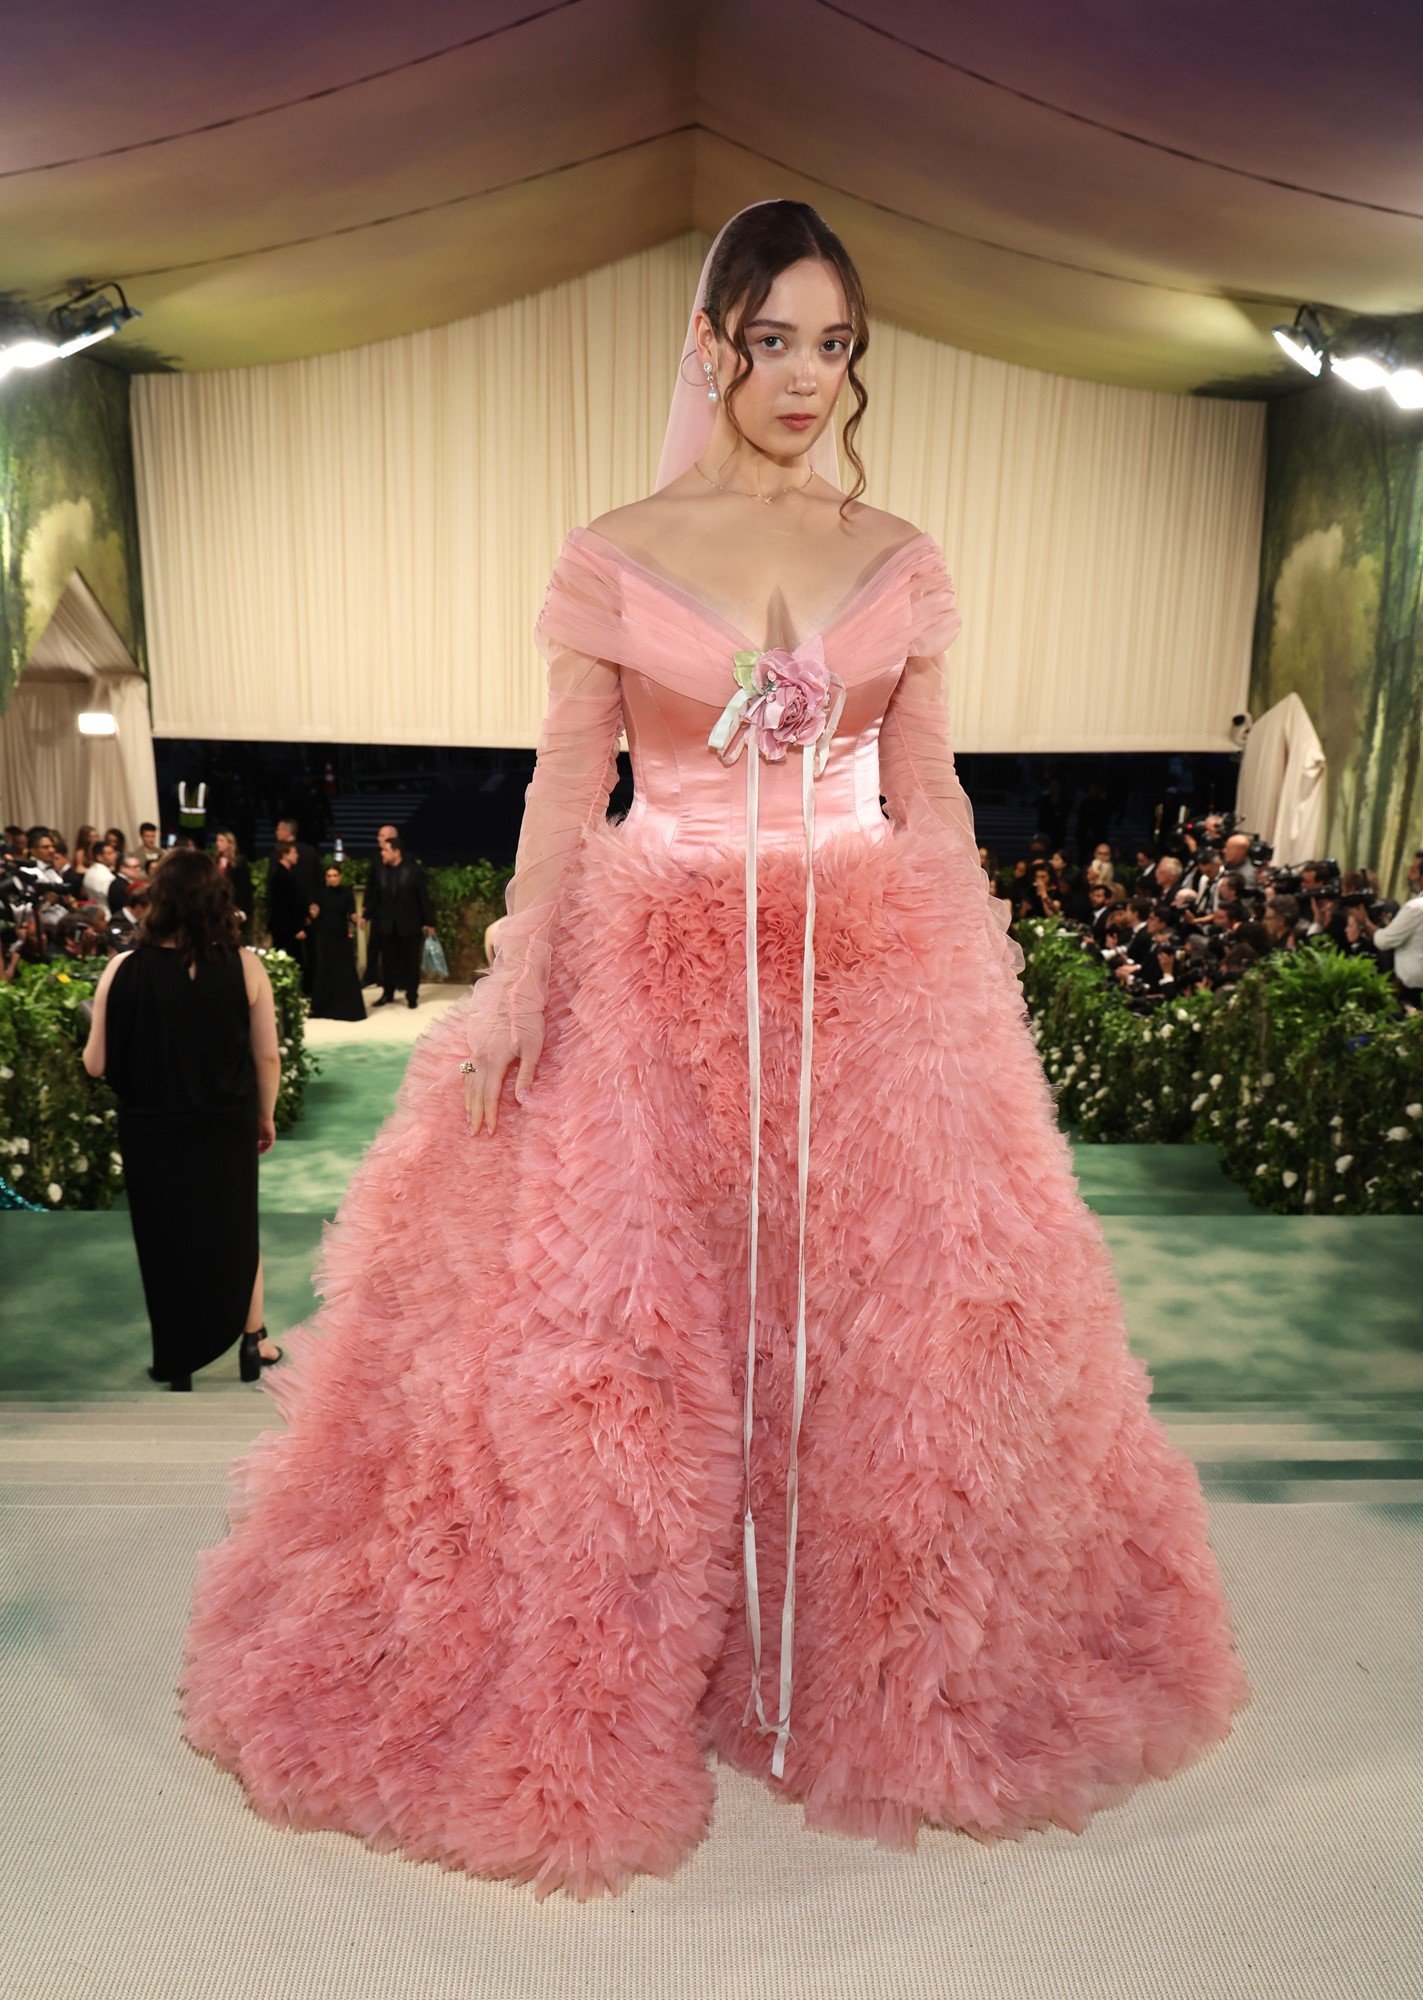 Laufey wears a pink fluffy gown with a giant flower at her chest.